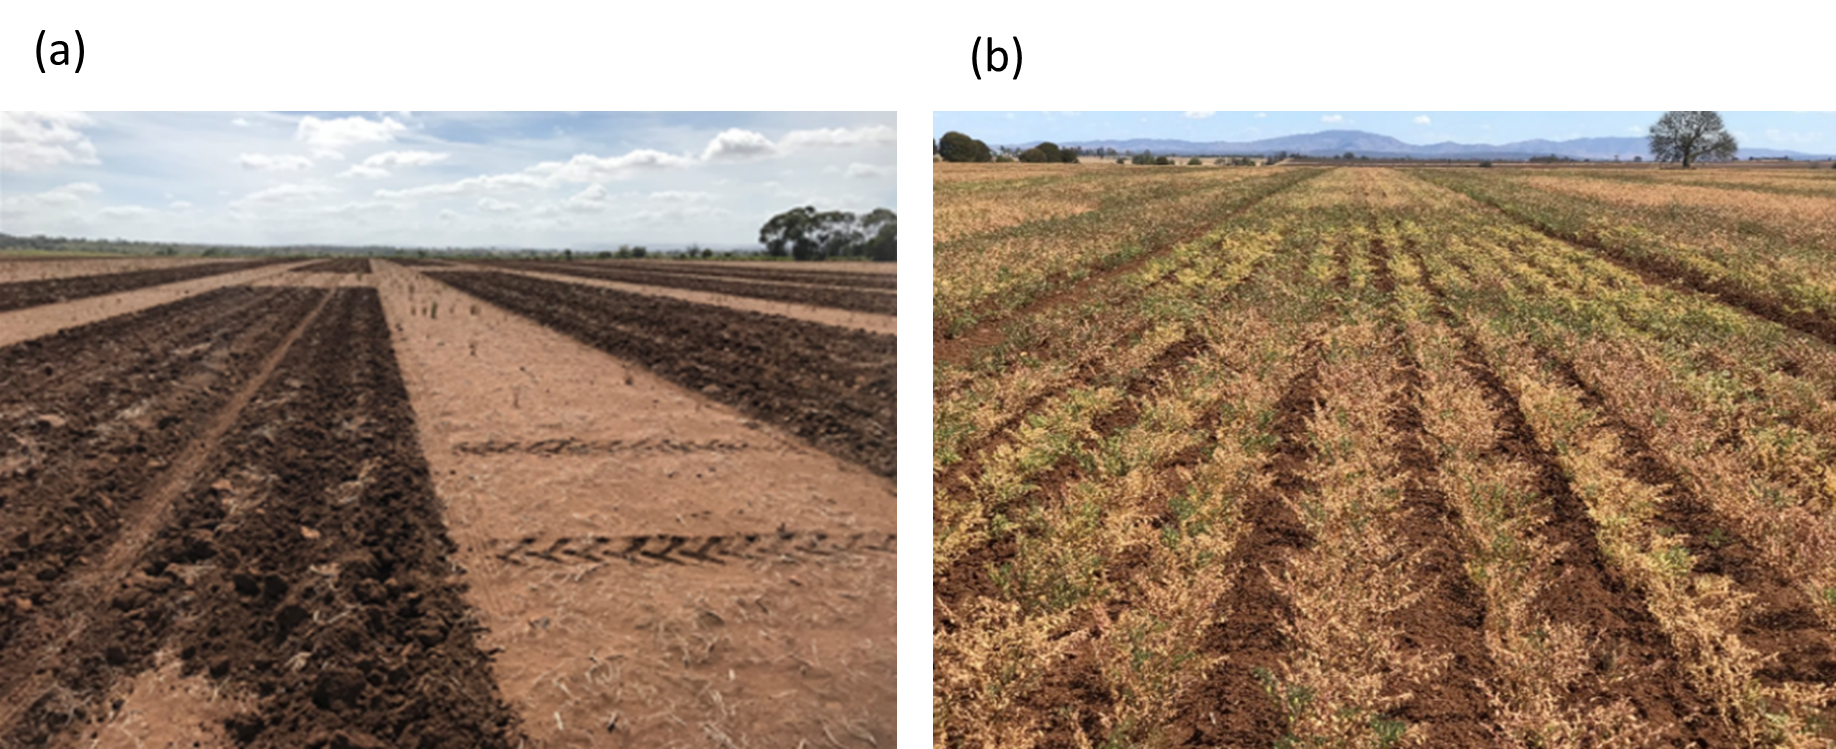 Photographs of re-application plots in December 2018 at Dululu and chickpea nearing maturity in 2019.